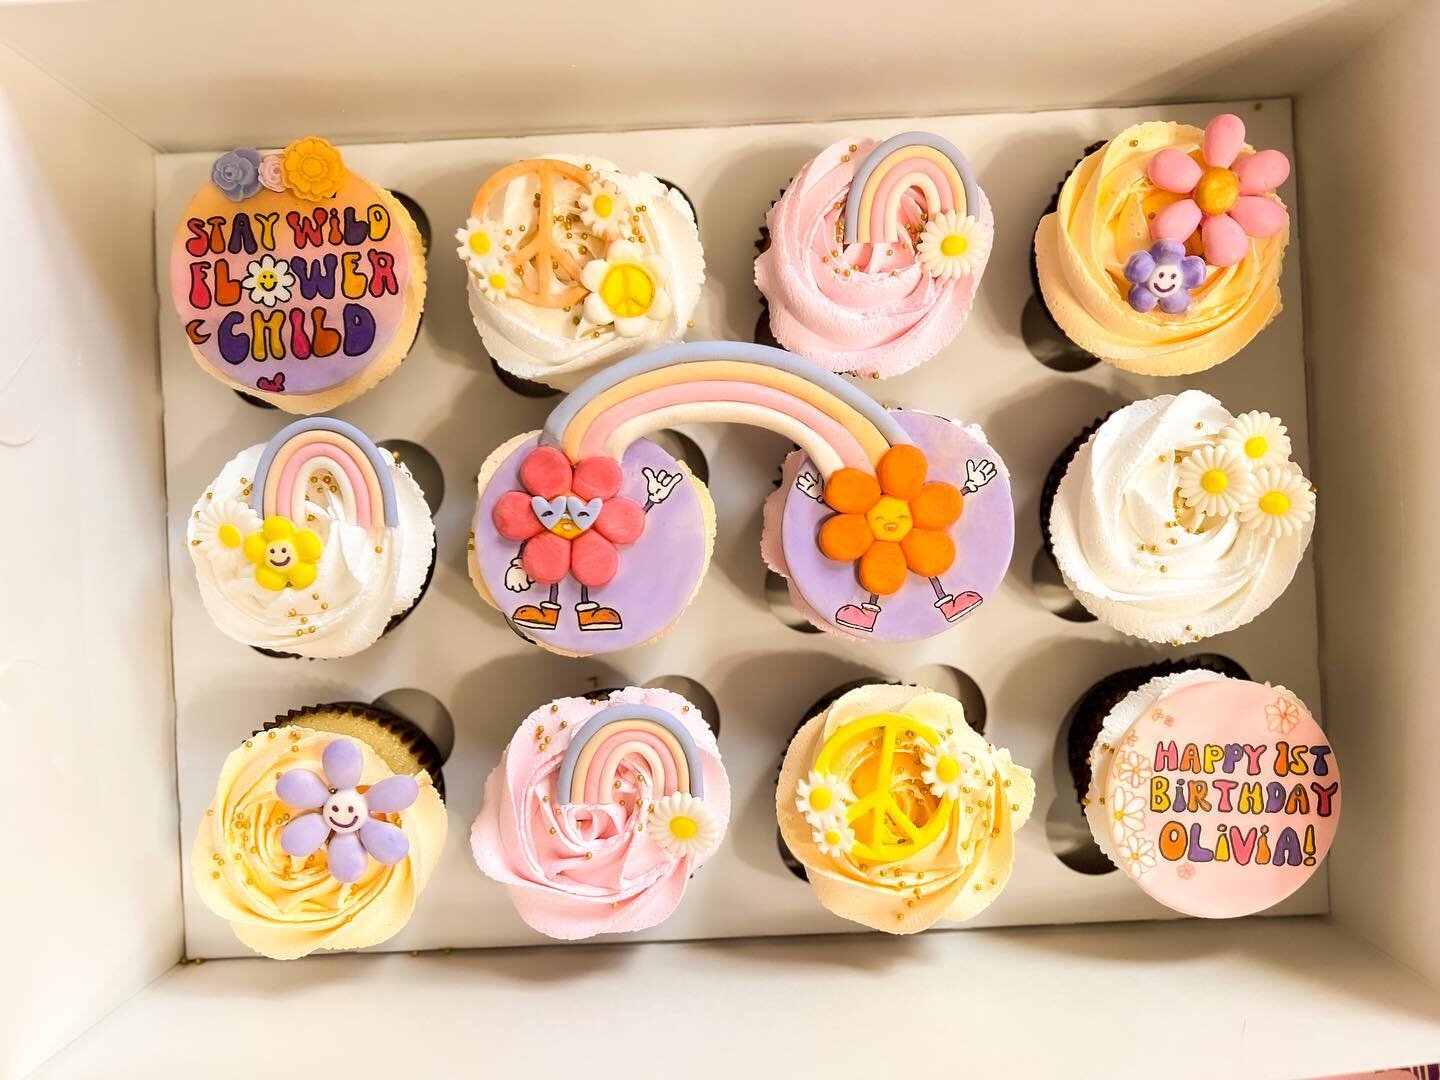 Groovy cupcakes with a twist! 🌼✌️ I decided to connect two toppers for the first time ever, creating a rainbow bridge of deliciousness. 🧁🌈 Spread the flower power and let me know how I did! 🎂🌸🍰